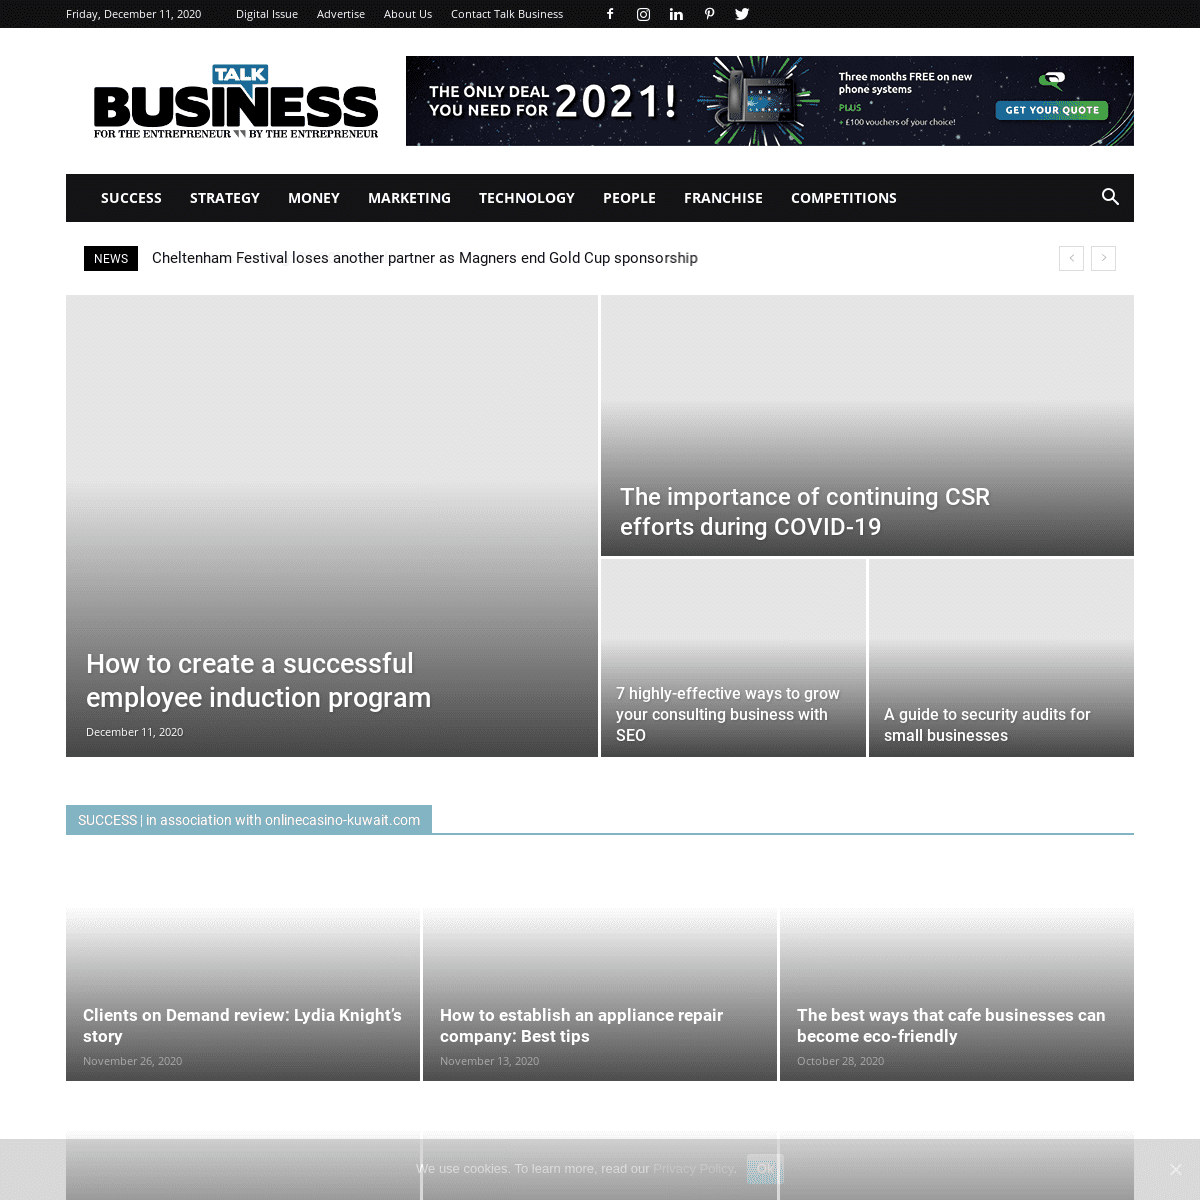 A complete backup of talk-business.co.uk